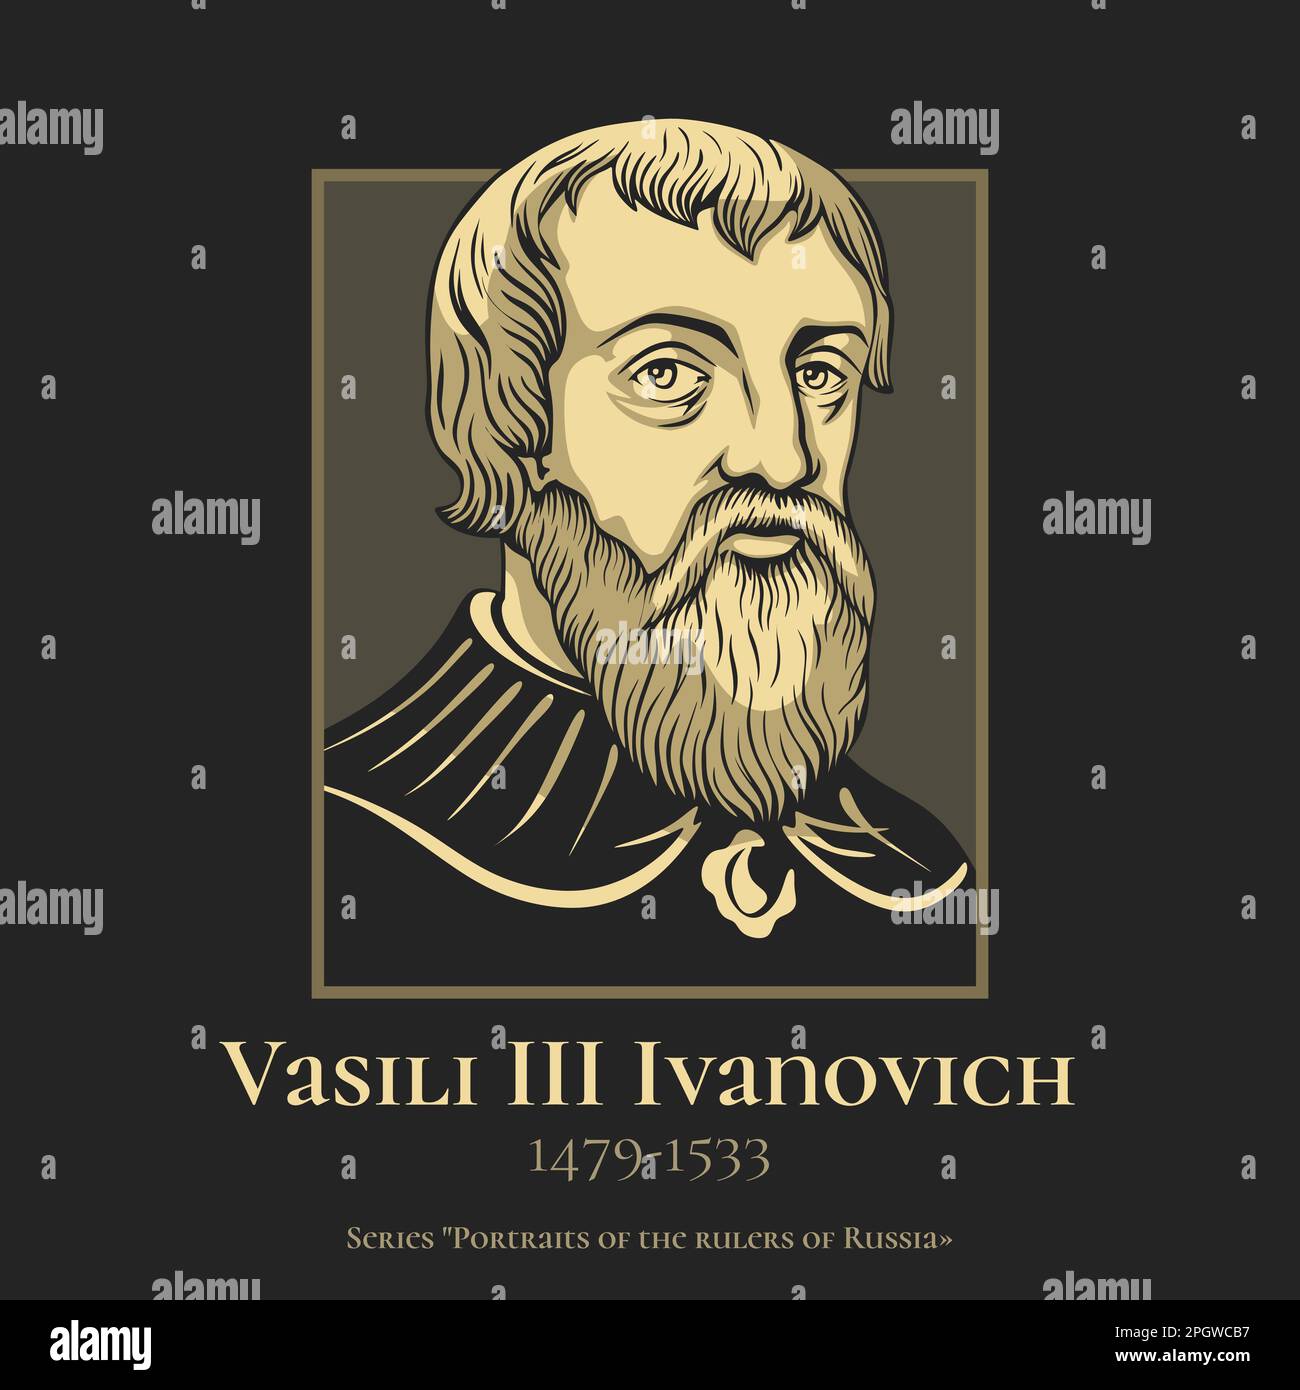 Vasili III Ivanovich (1479-1533) was the Grand Prince of Moscow from 1505 to 1533. Stock Vector